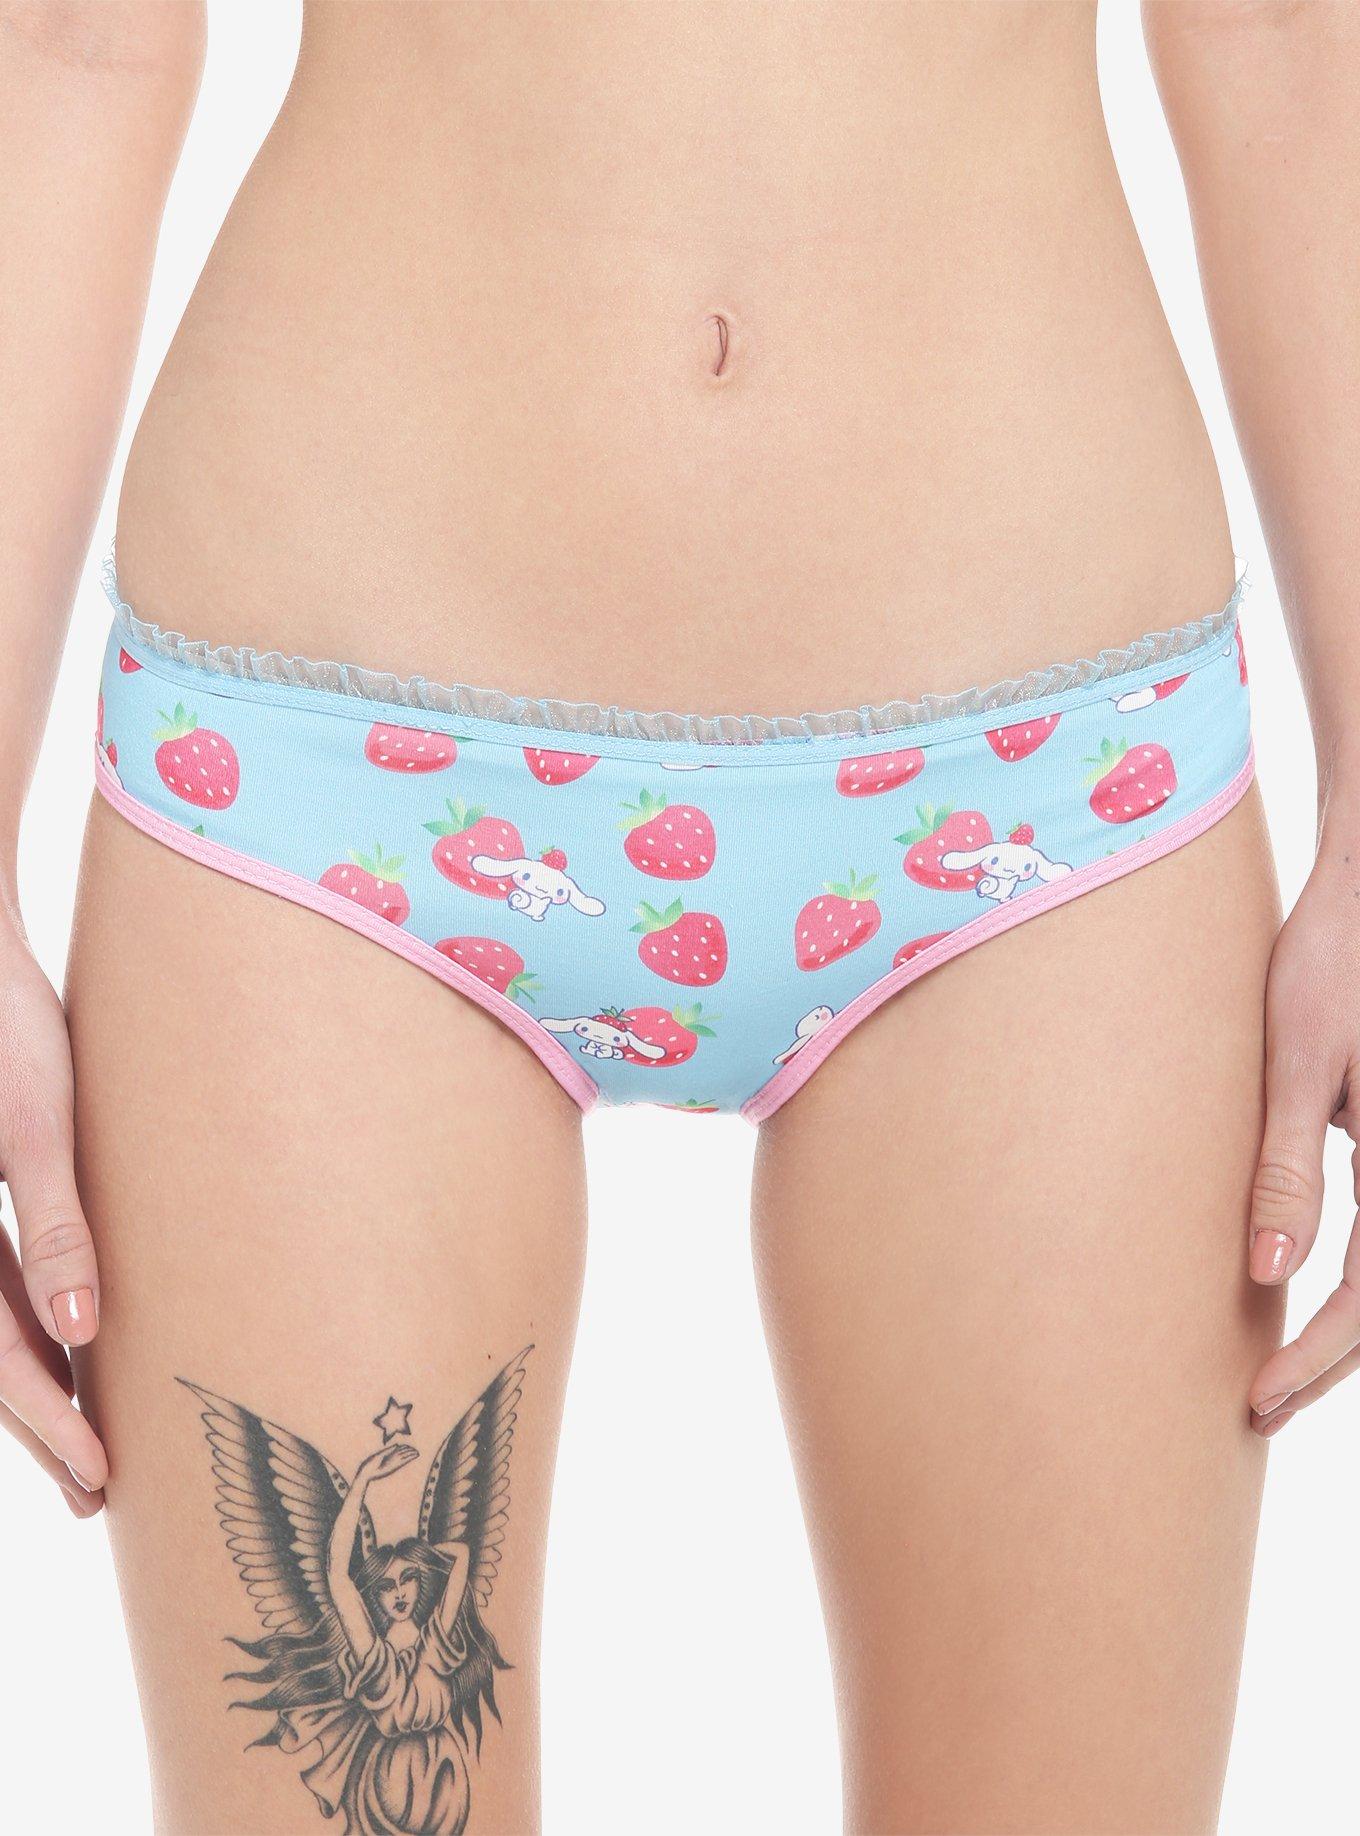  CANDY PANTS EDIBLE UNDERWEAR HIS AND HERS STRAWBERRY